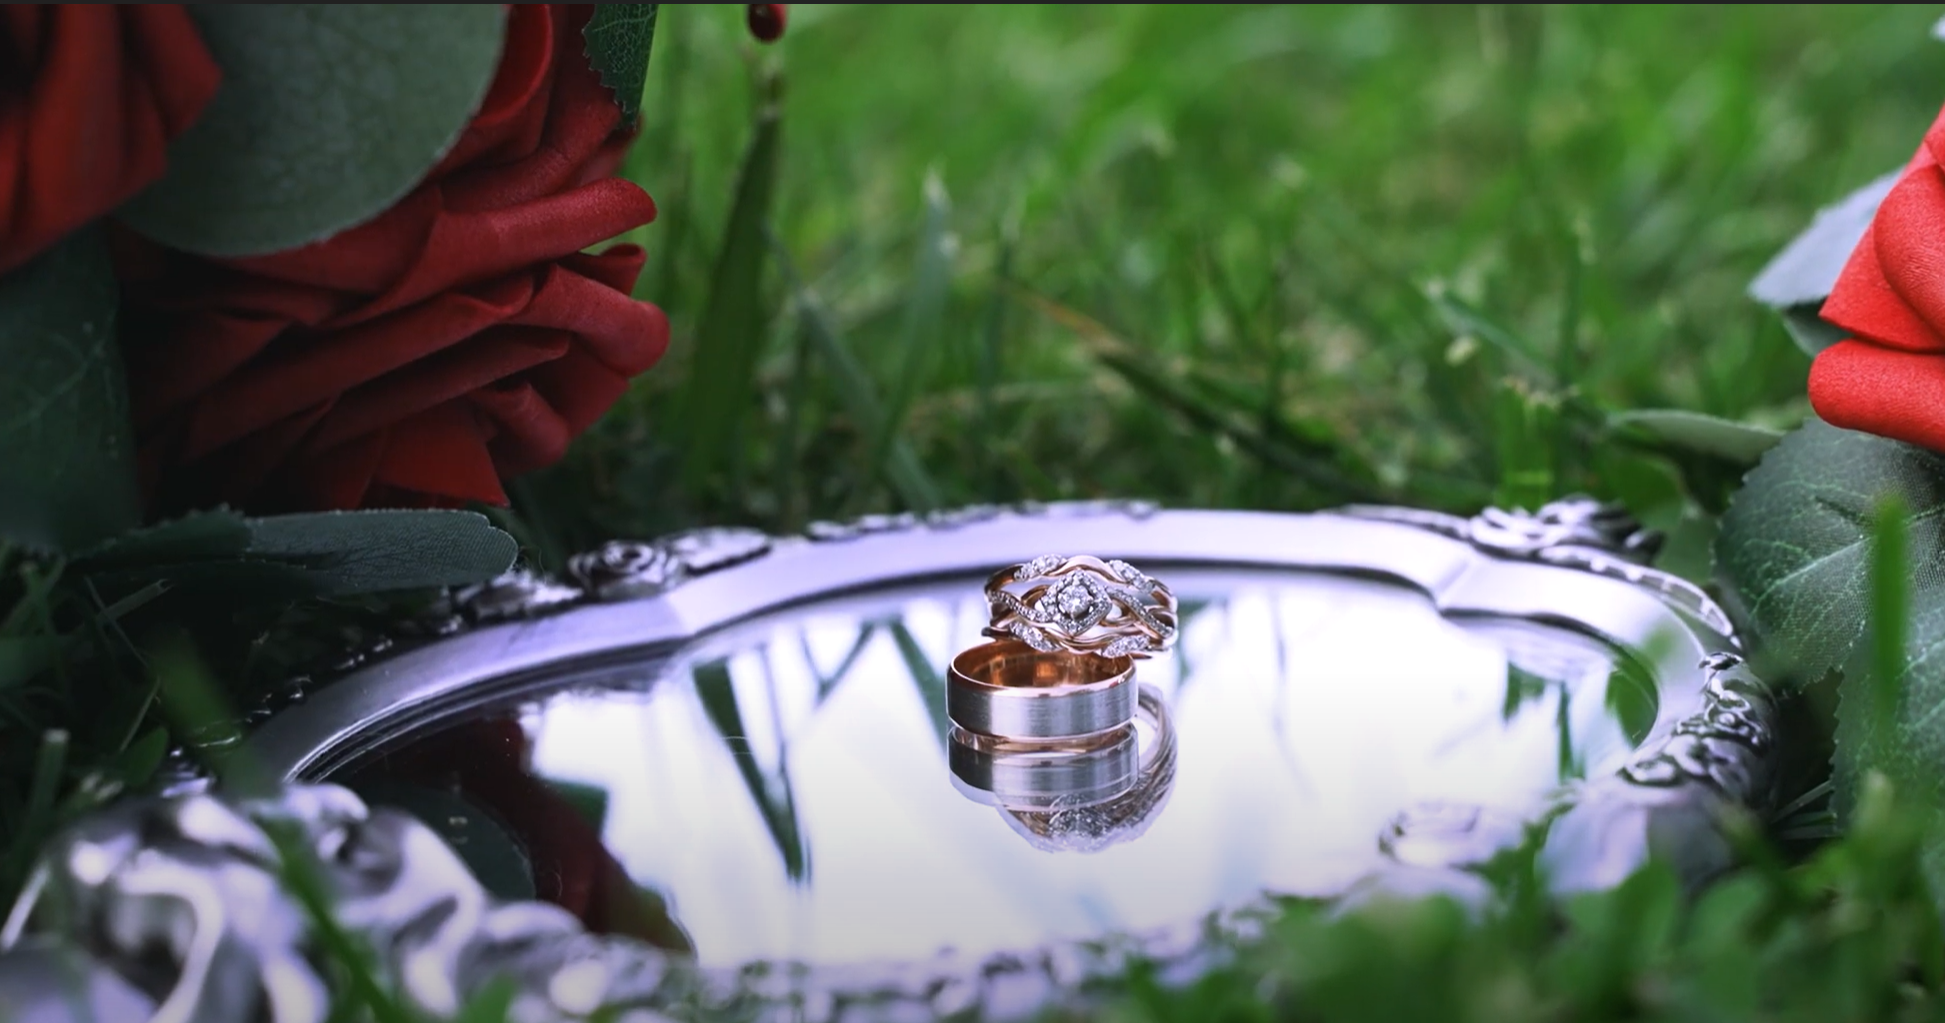 Beauty and the Beast inspired wedding rings